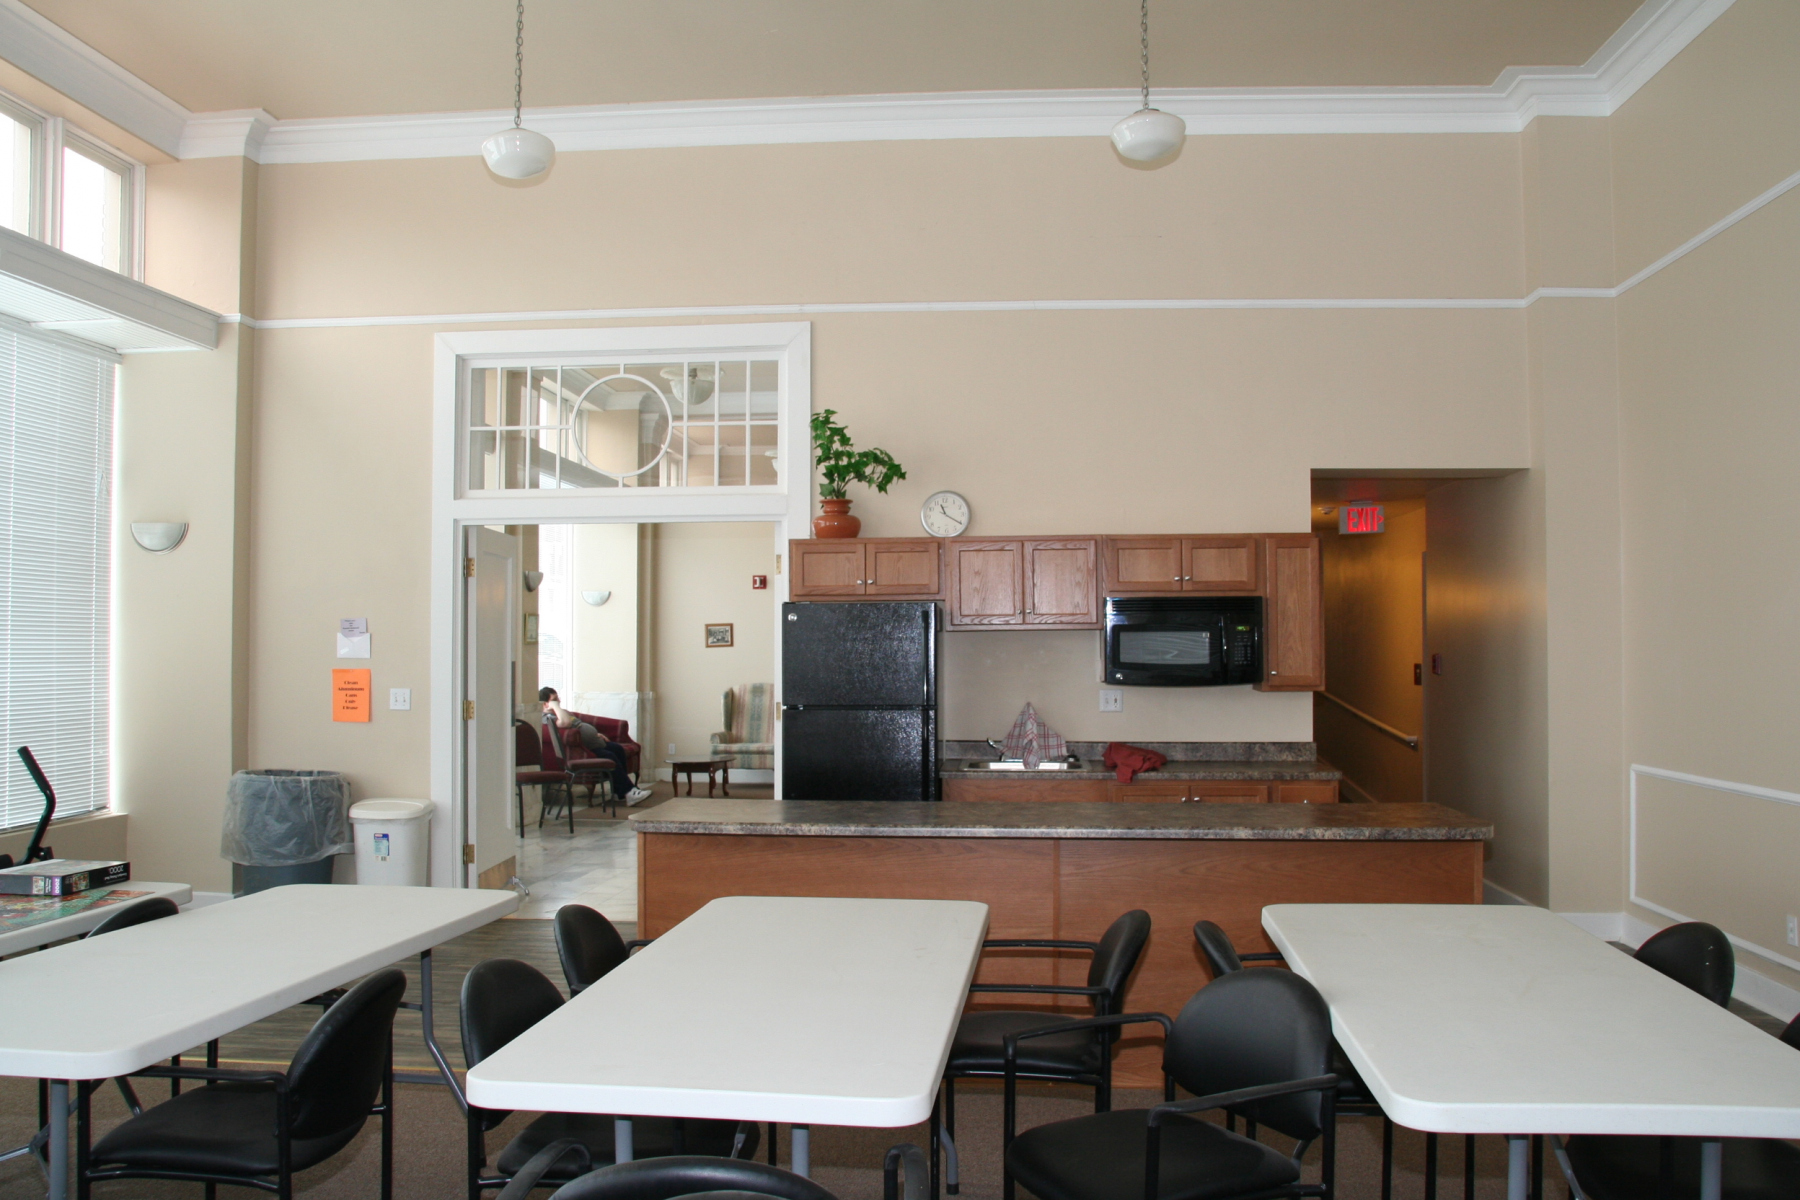 Courthouse Square Community Room